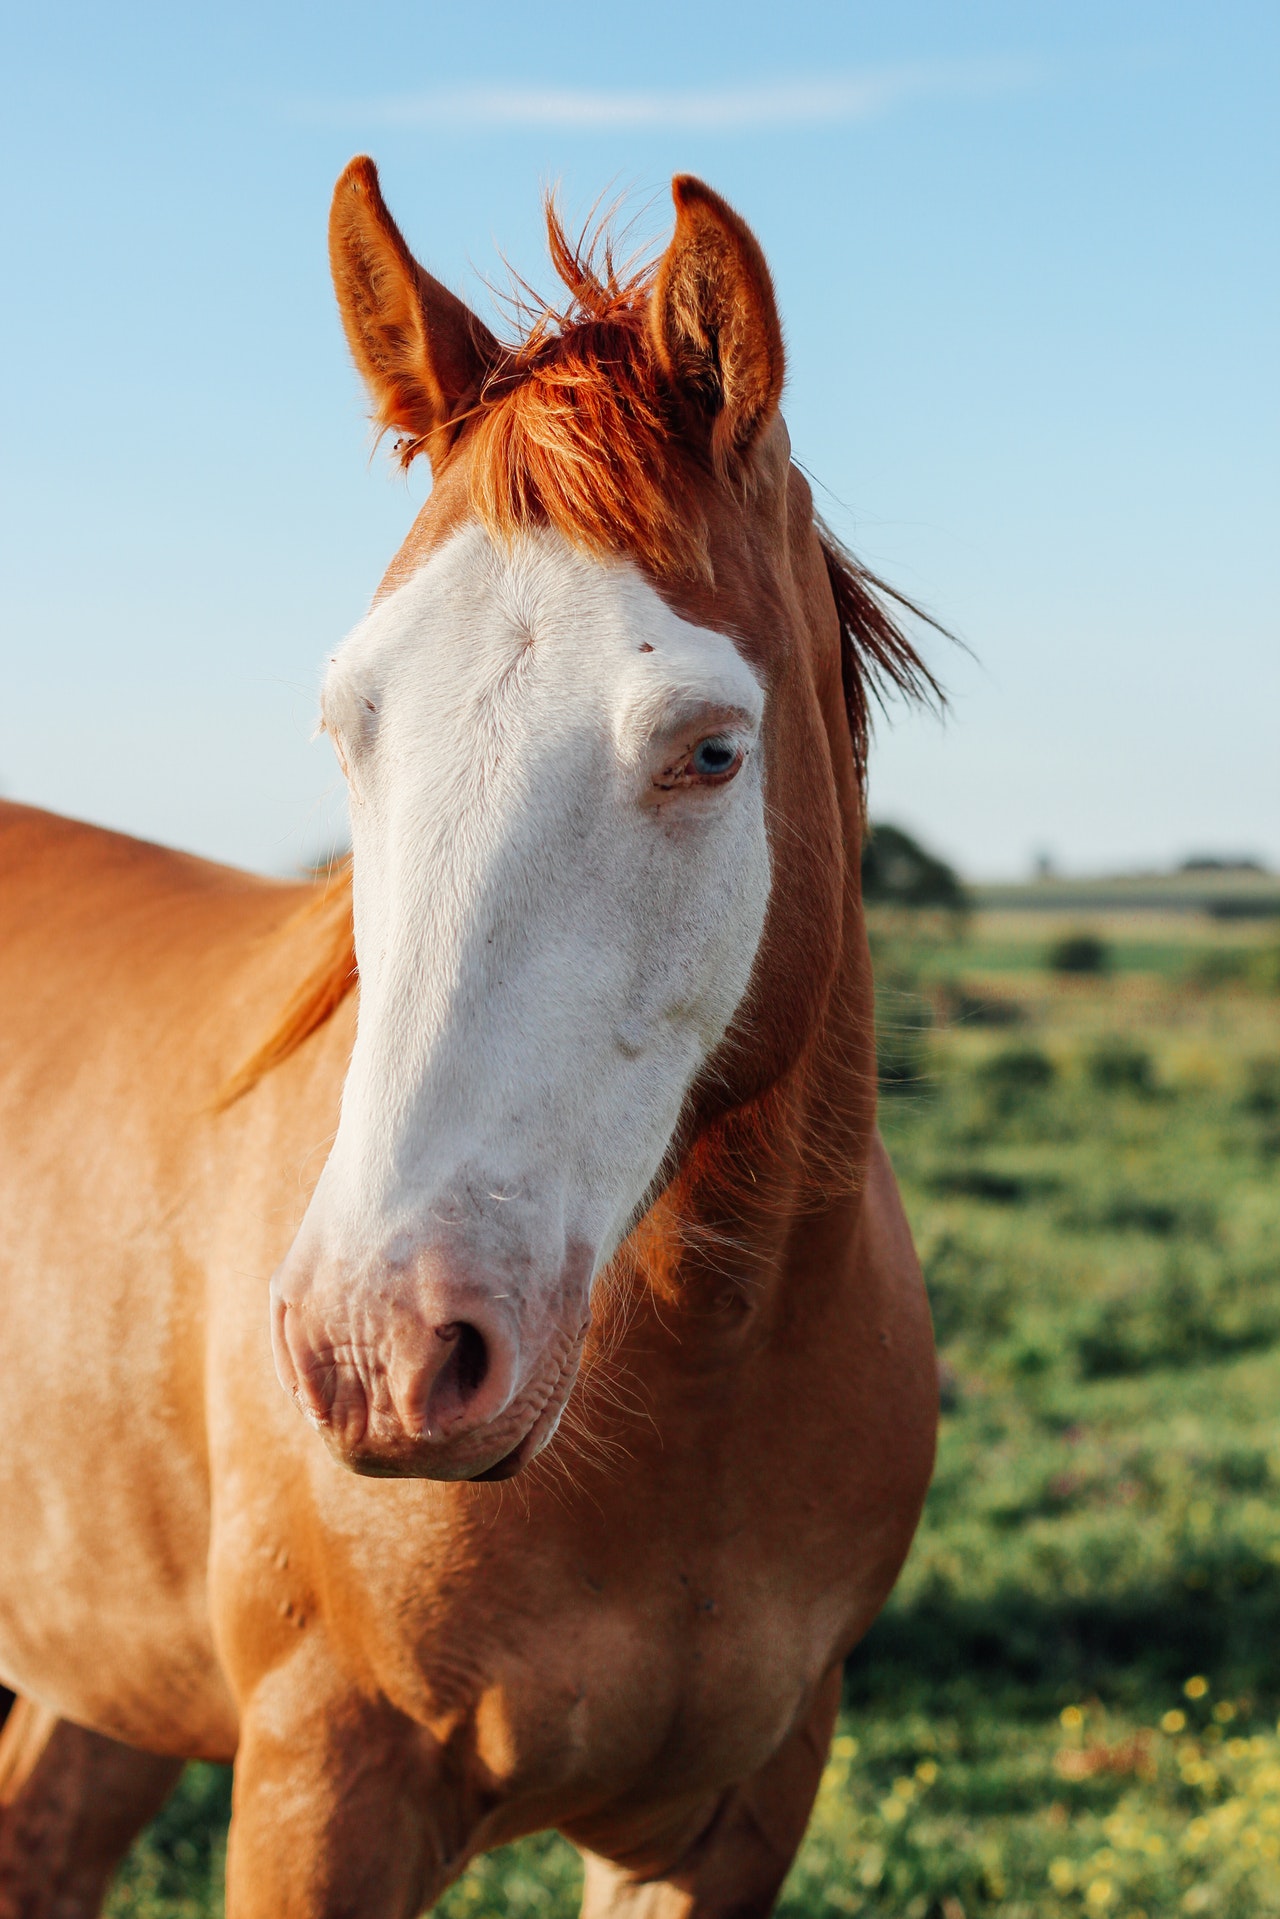 what is average lifespan of horses